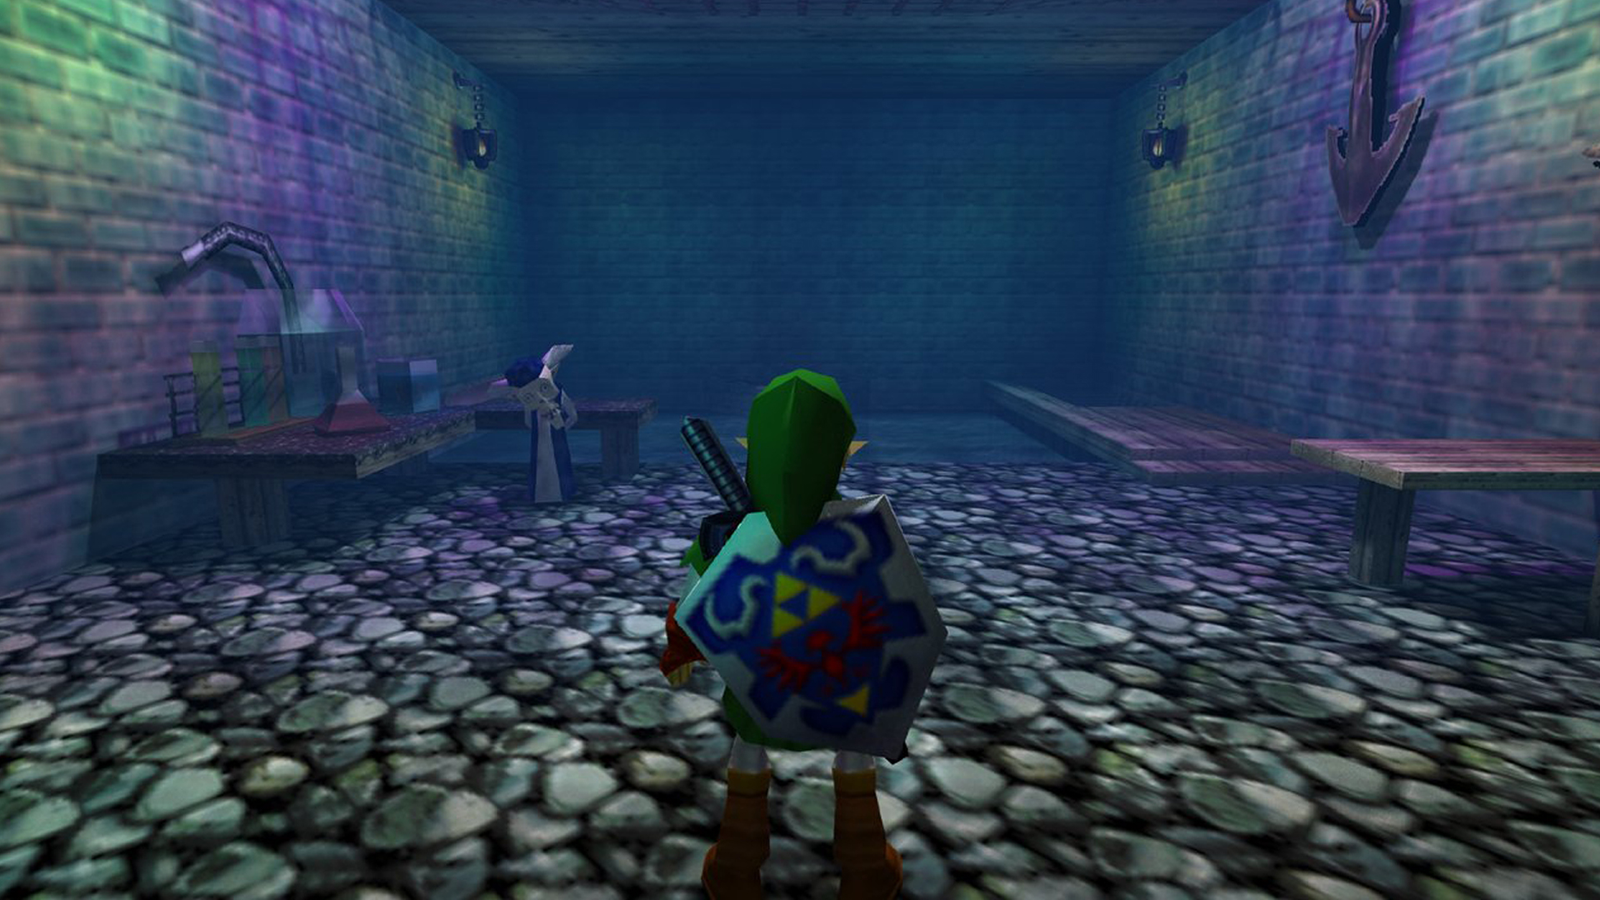 Emulator devs are bringing 60 FPS and ray tracing to N64 games like Paper  Mario and Zelda: Ocarina of Time